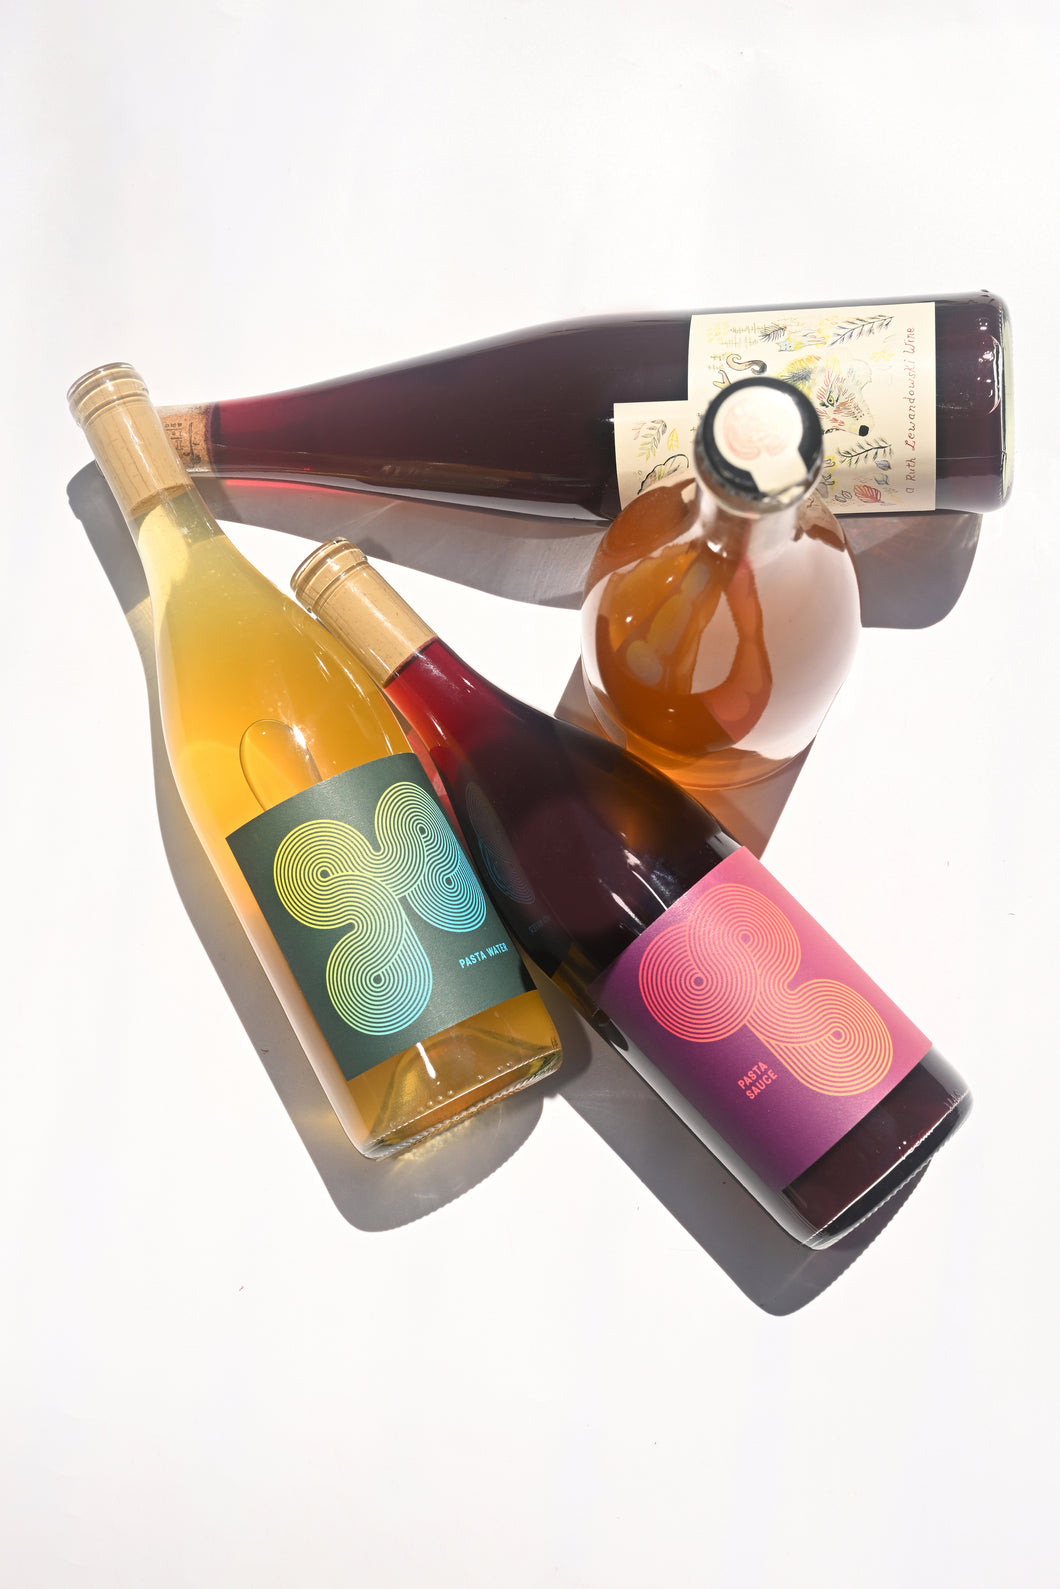 Monthly Wine Club - Shipped To Your Door